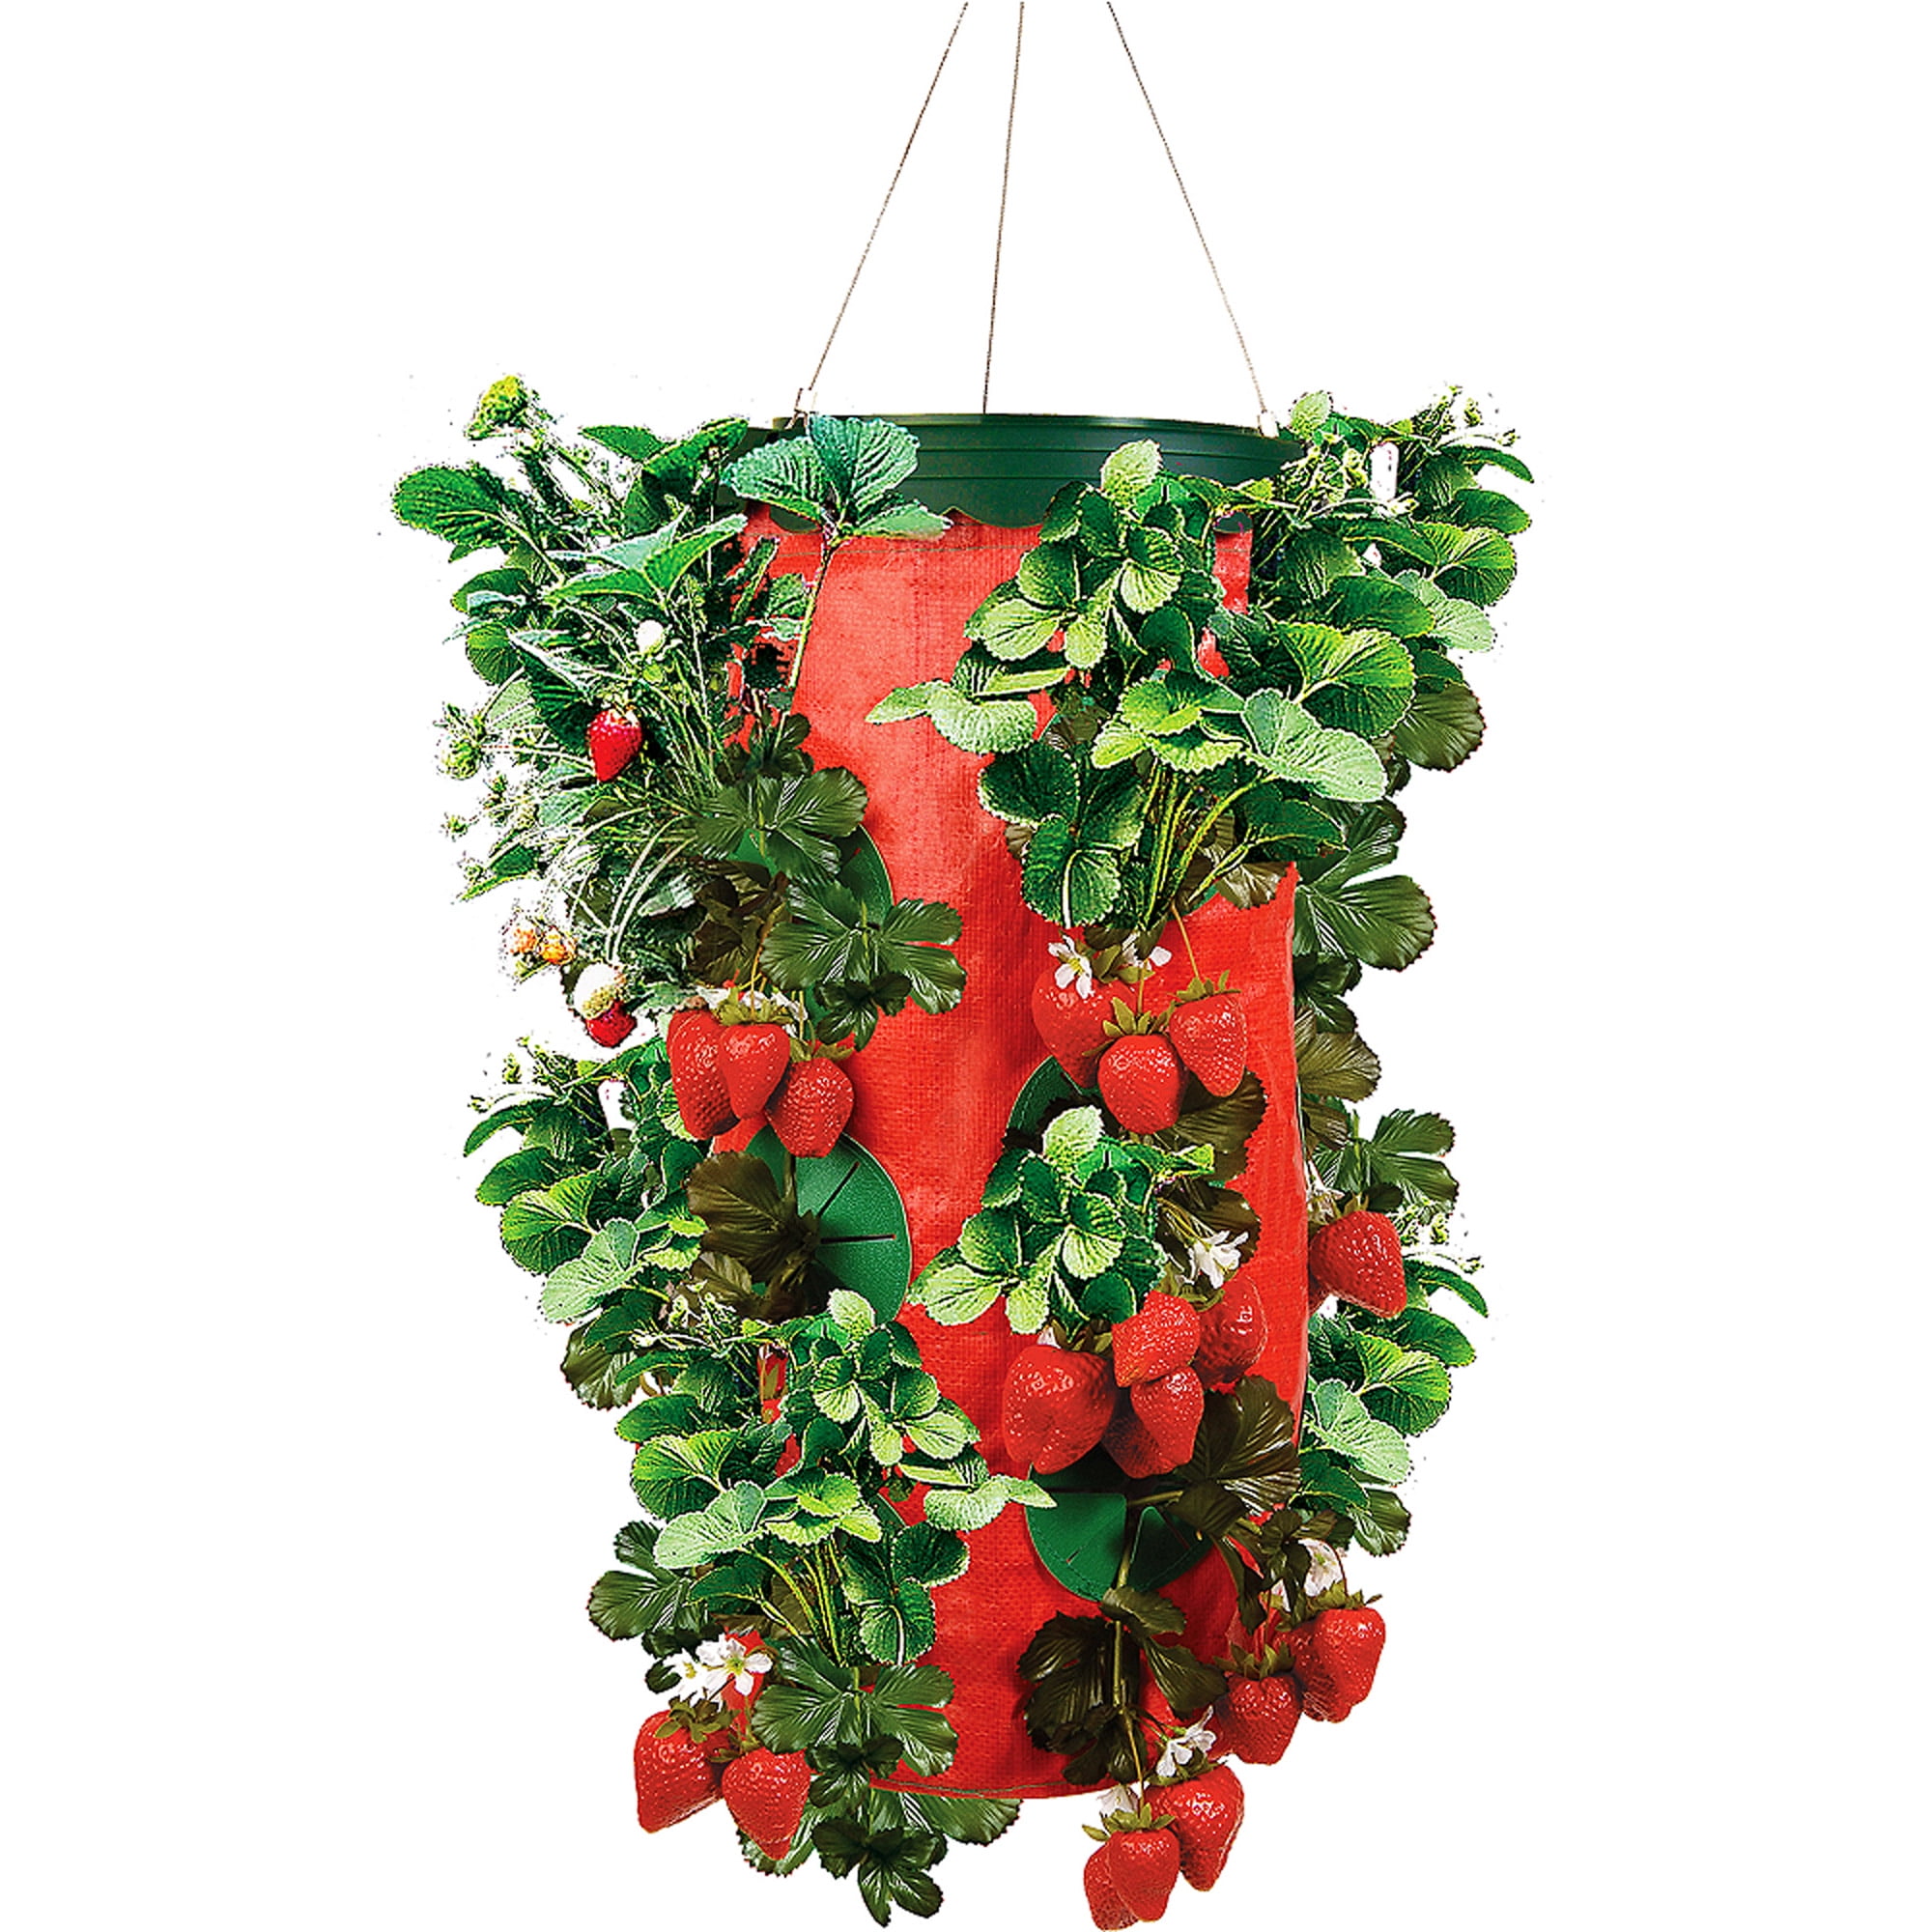 NEW Topsy Turvy Strawberry Round Upside Down Planter As Seen On TV Grows 15 qts 